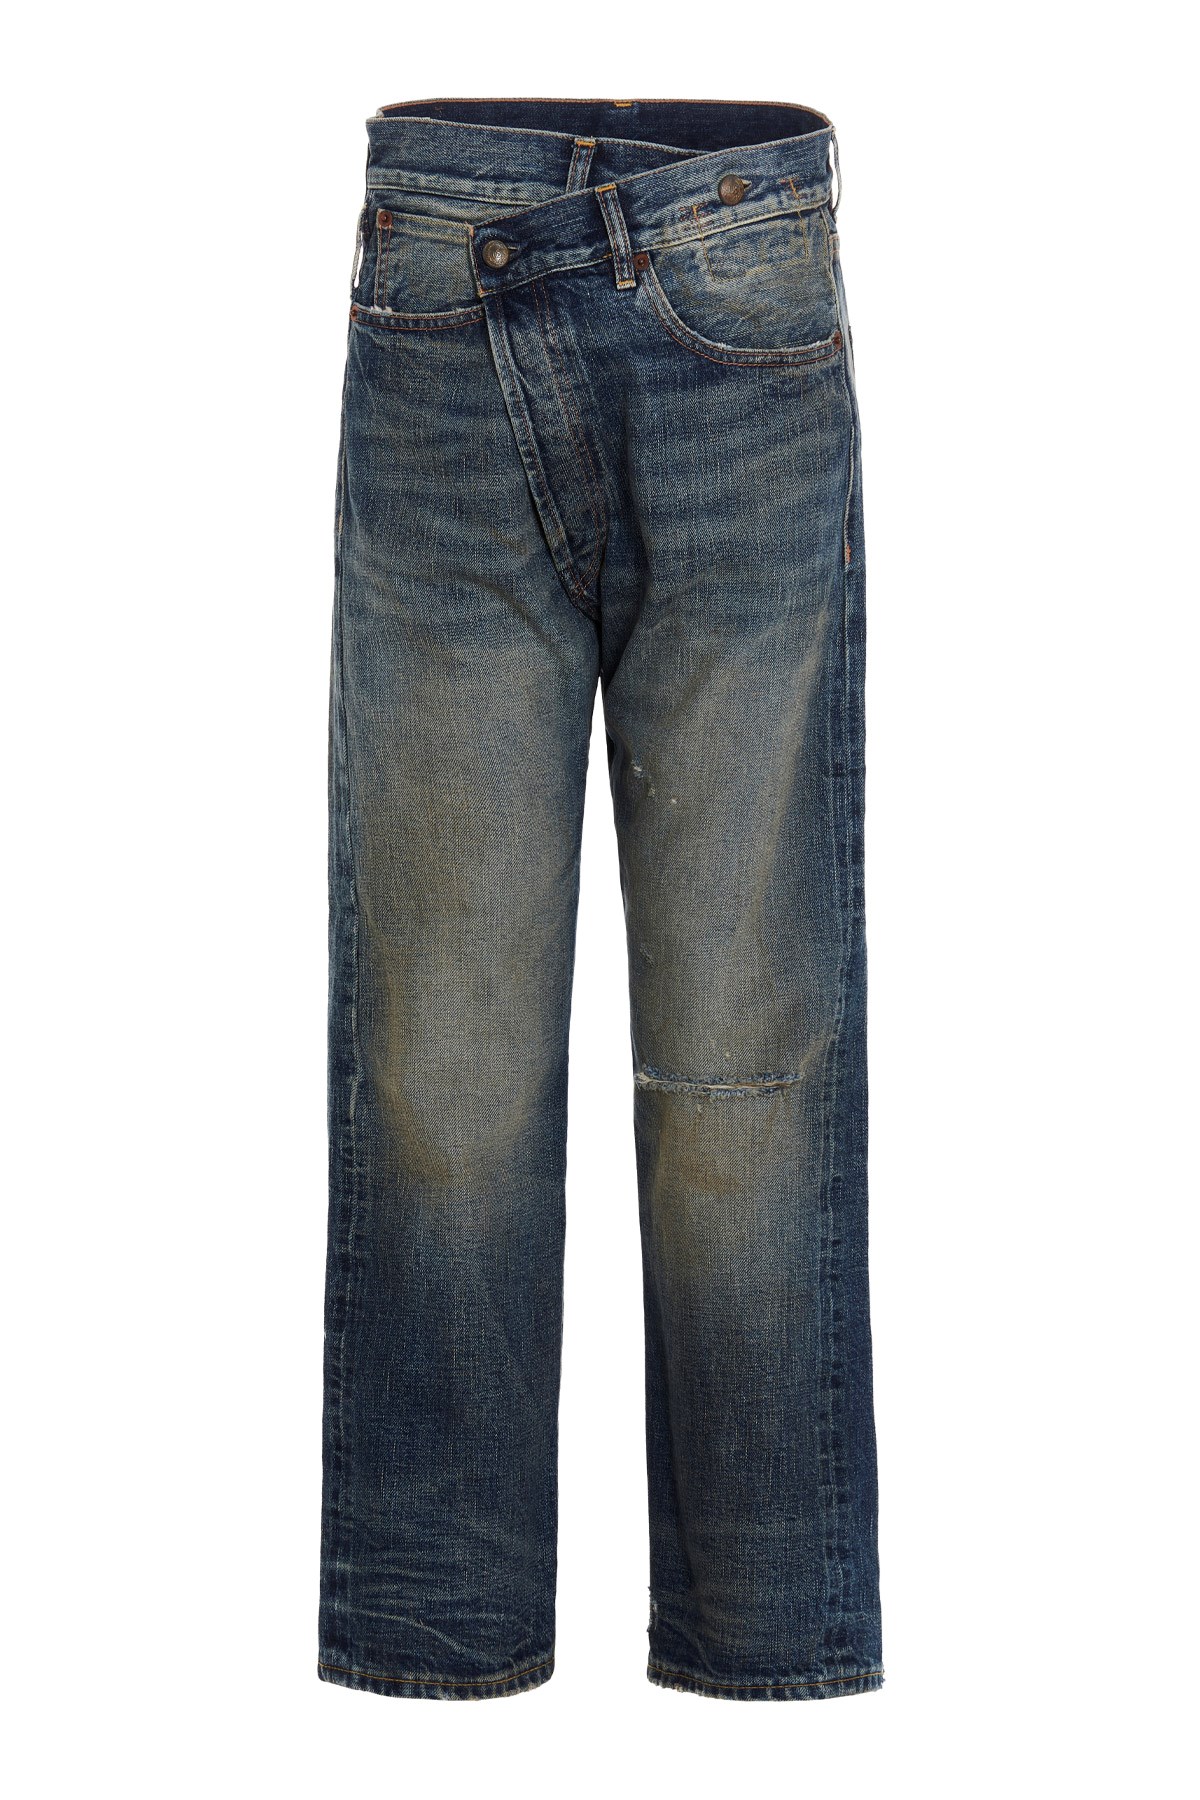 R13 'Crossover’ Jeans